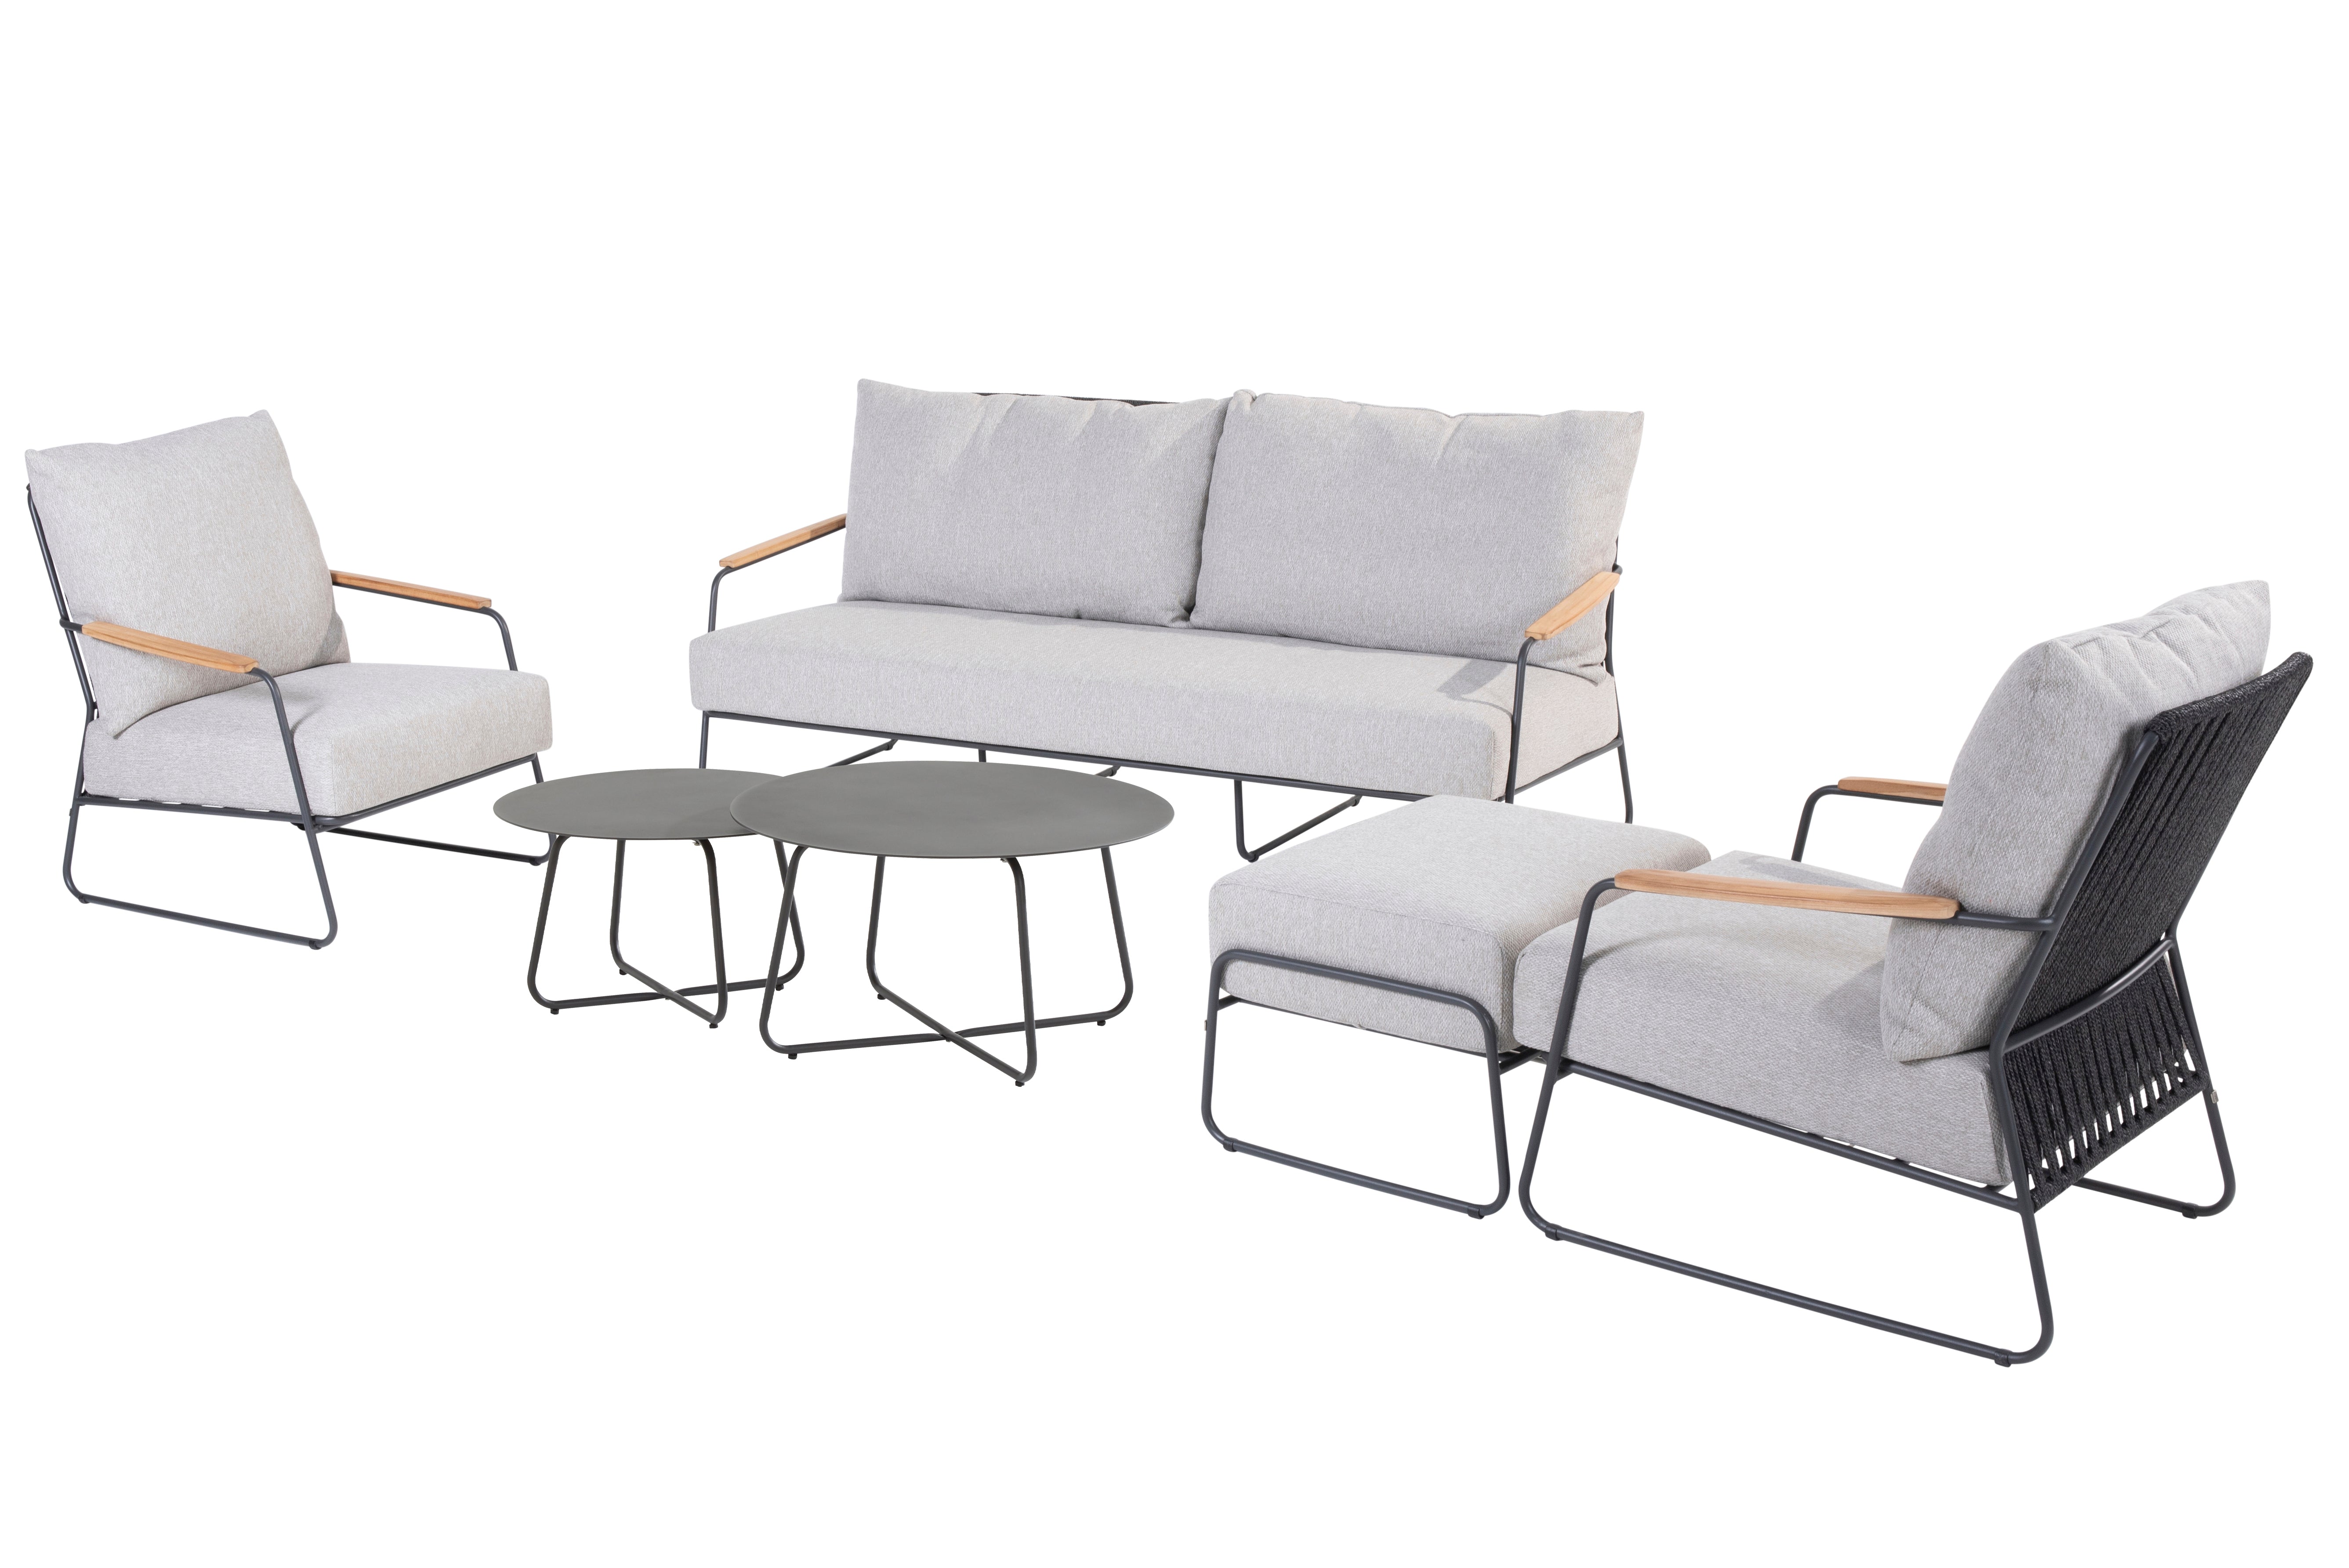 4 Seasons Outdoor Balade Lounge With Verdi Rect And Footstool Set